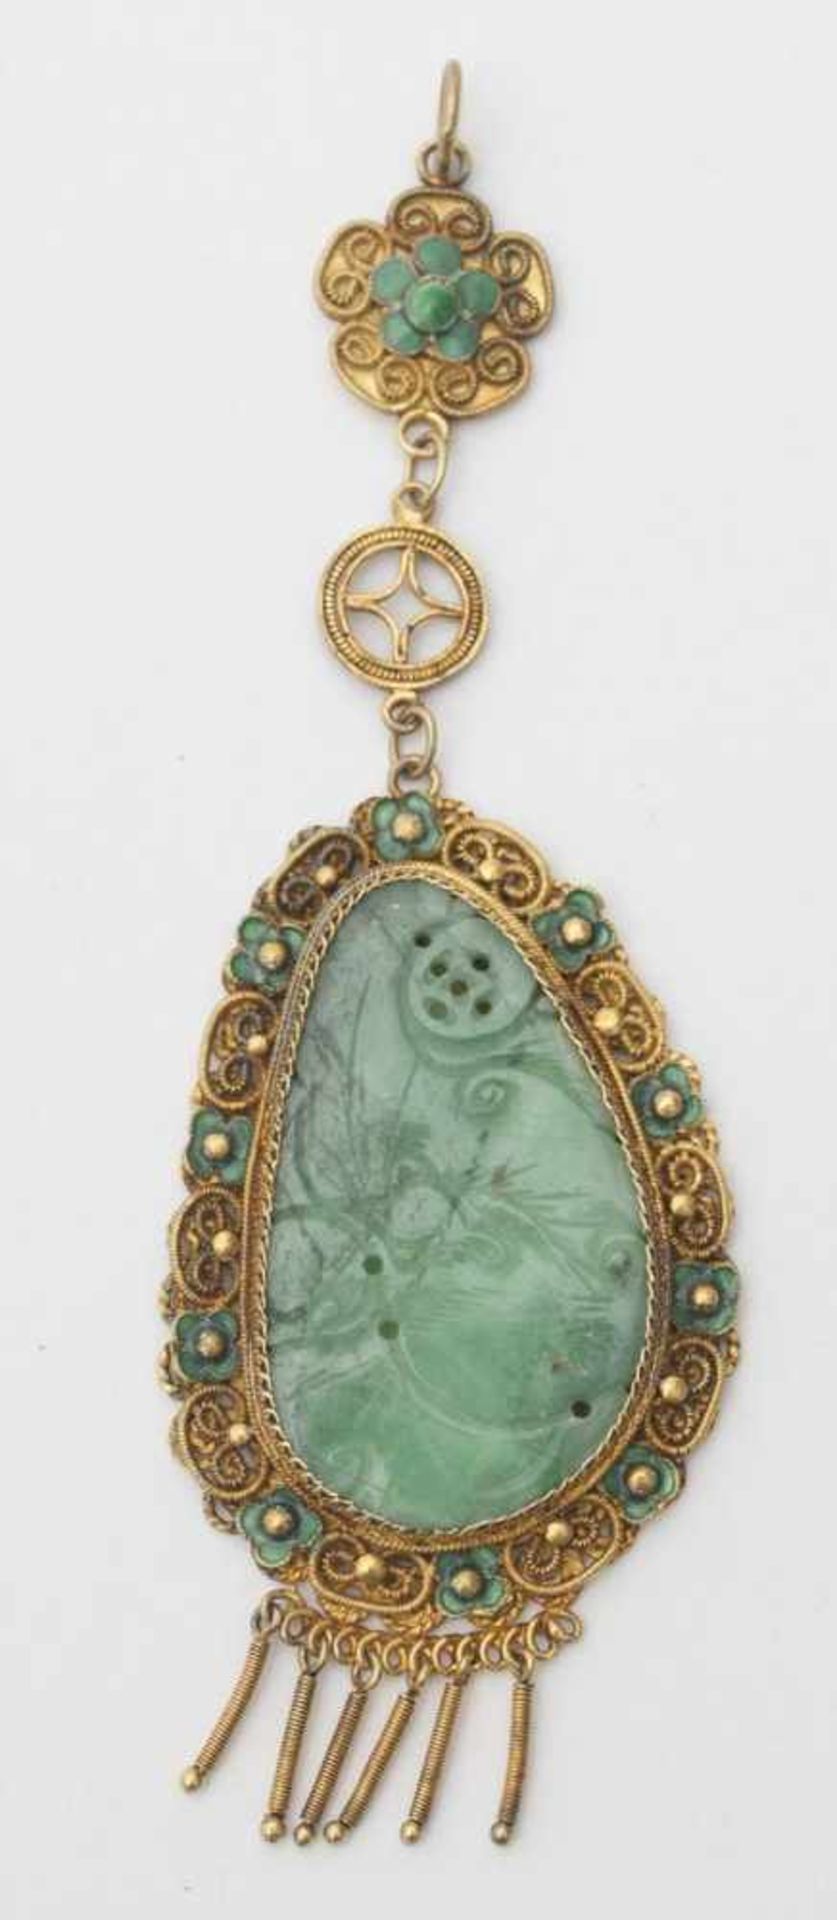 Pendant set with jade - China, 20th century In gilded silver filigree, decorated in green enamel,